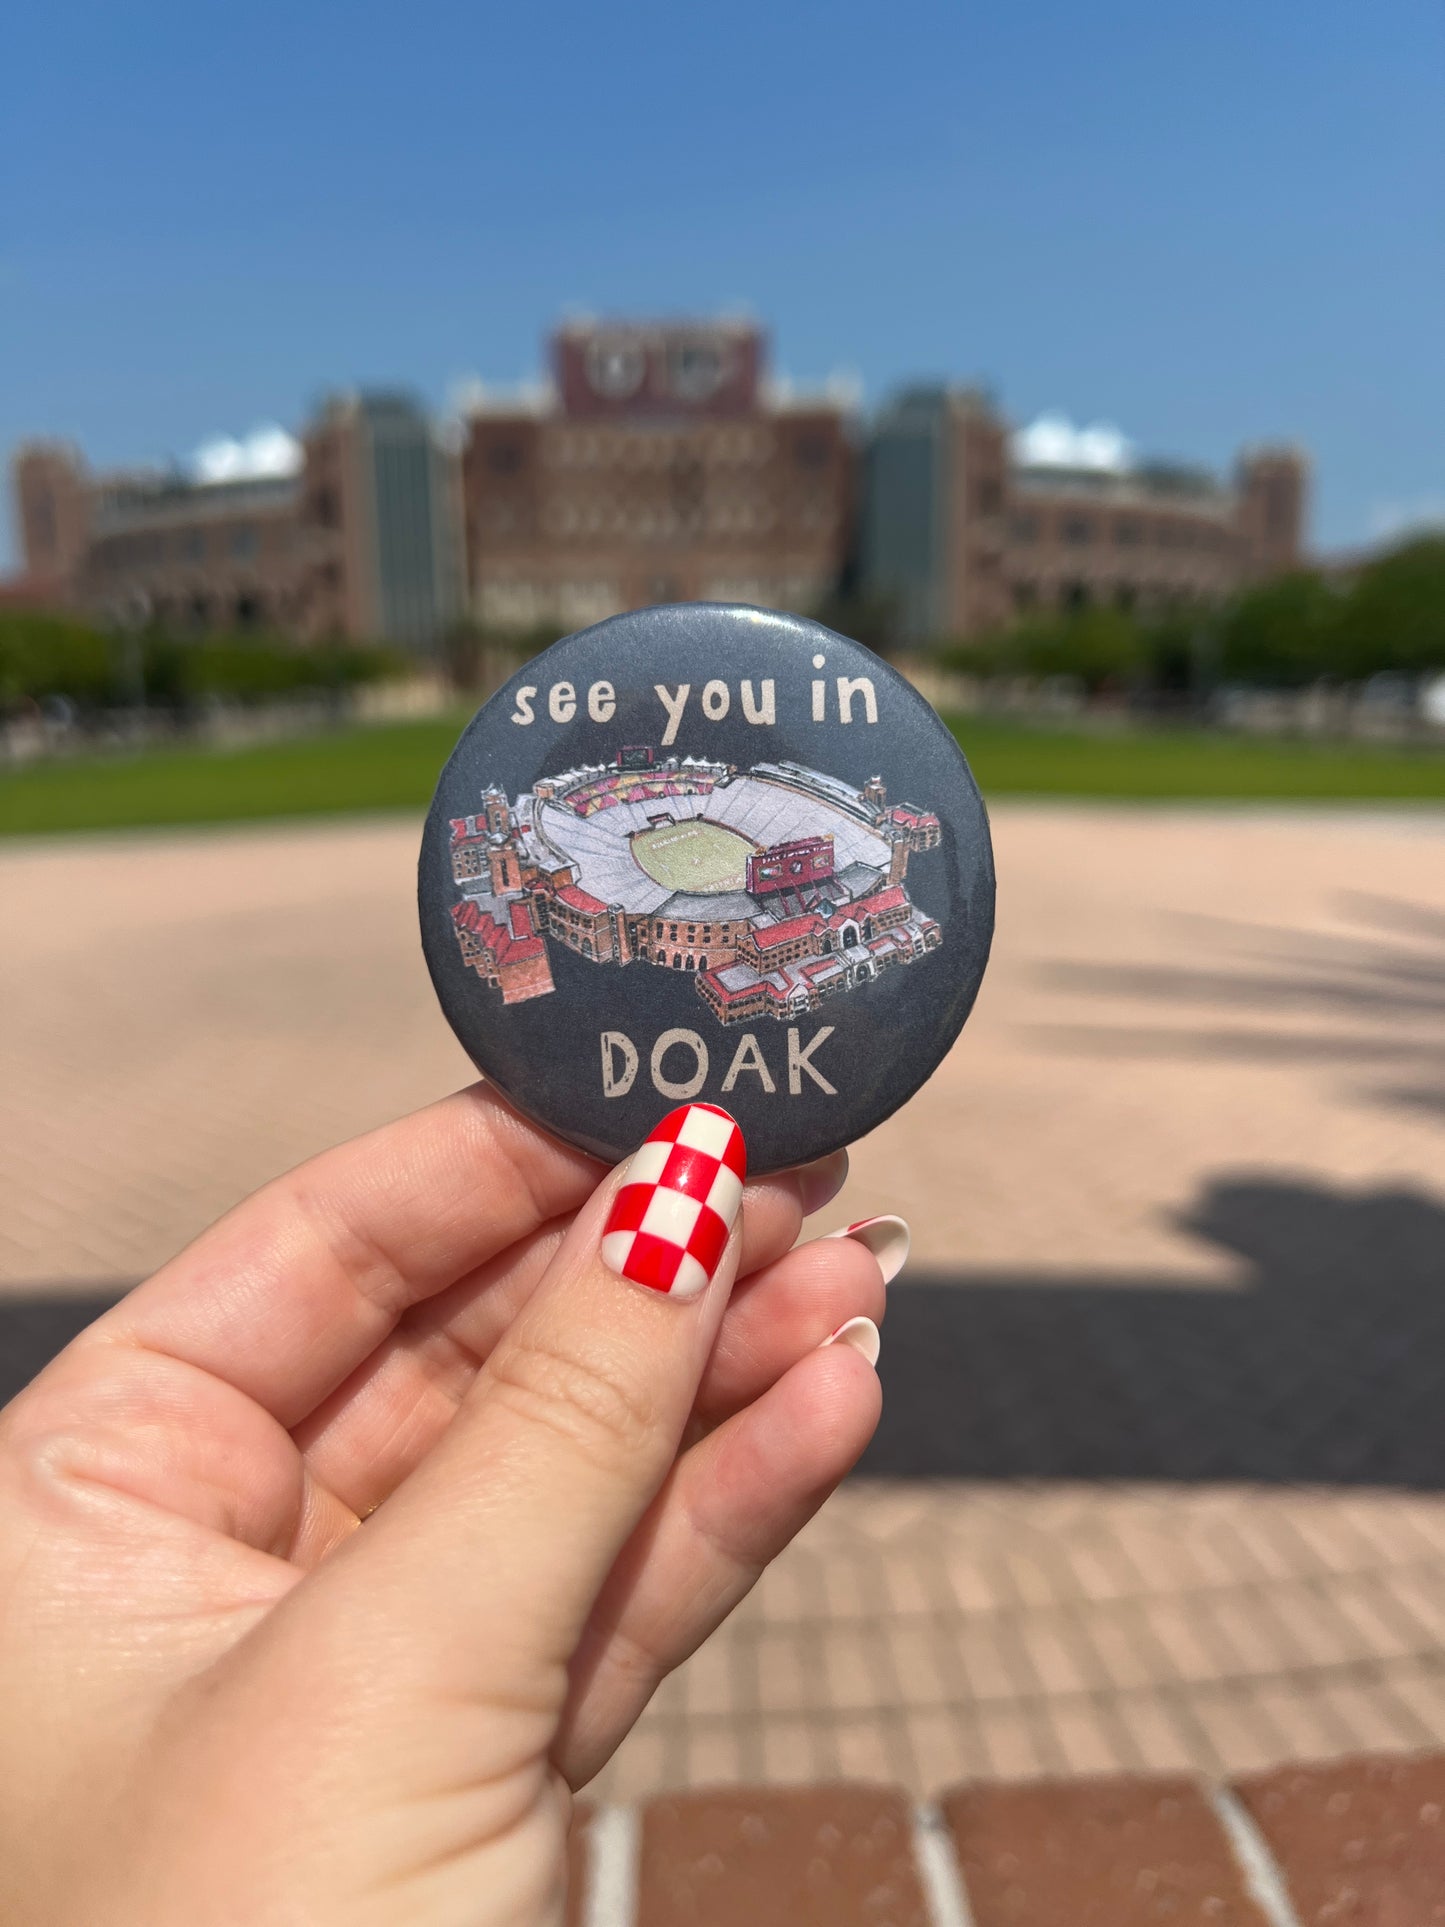 Florida State University “See you in Doak” button